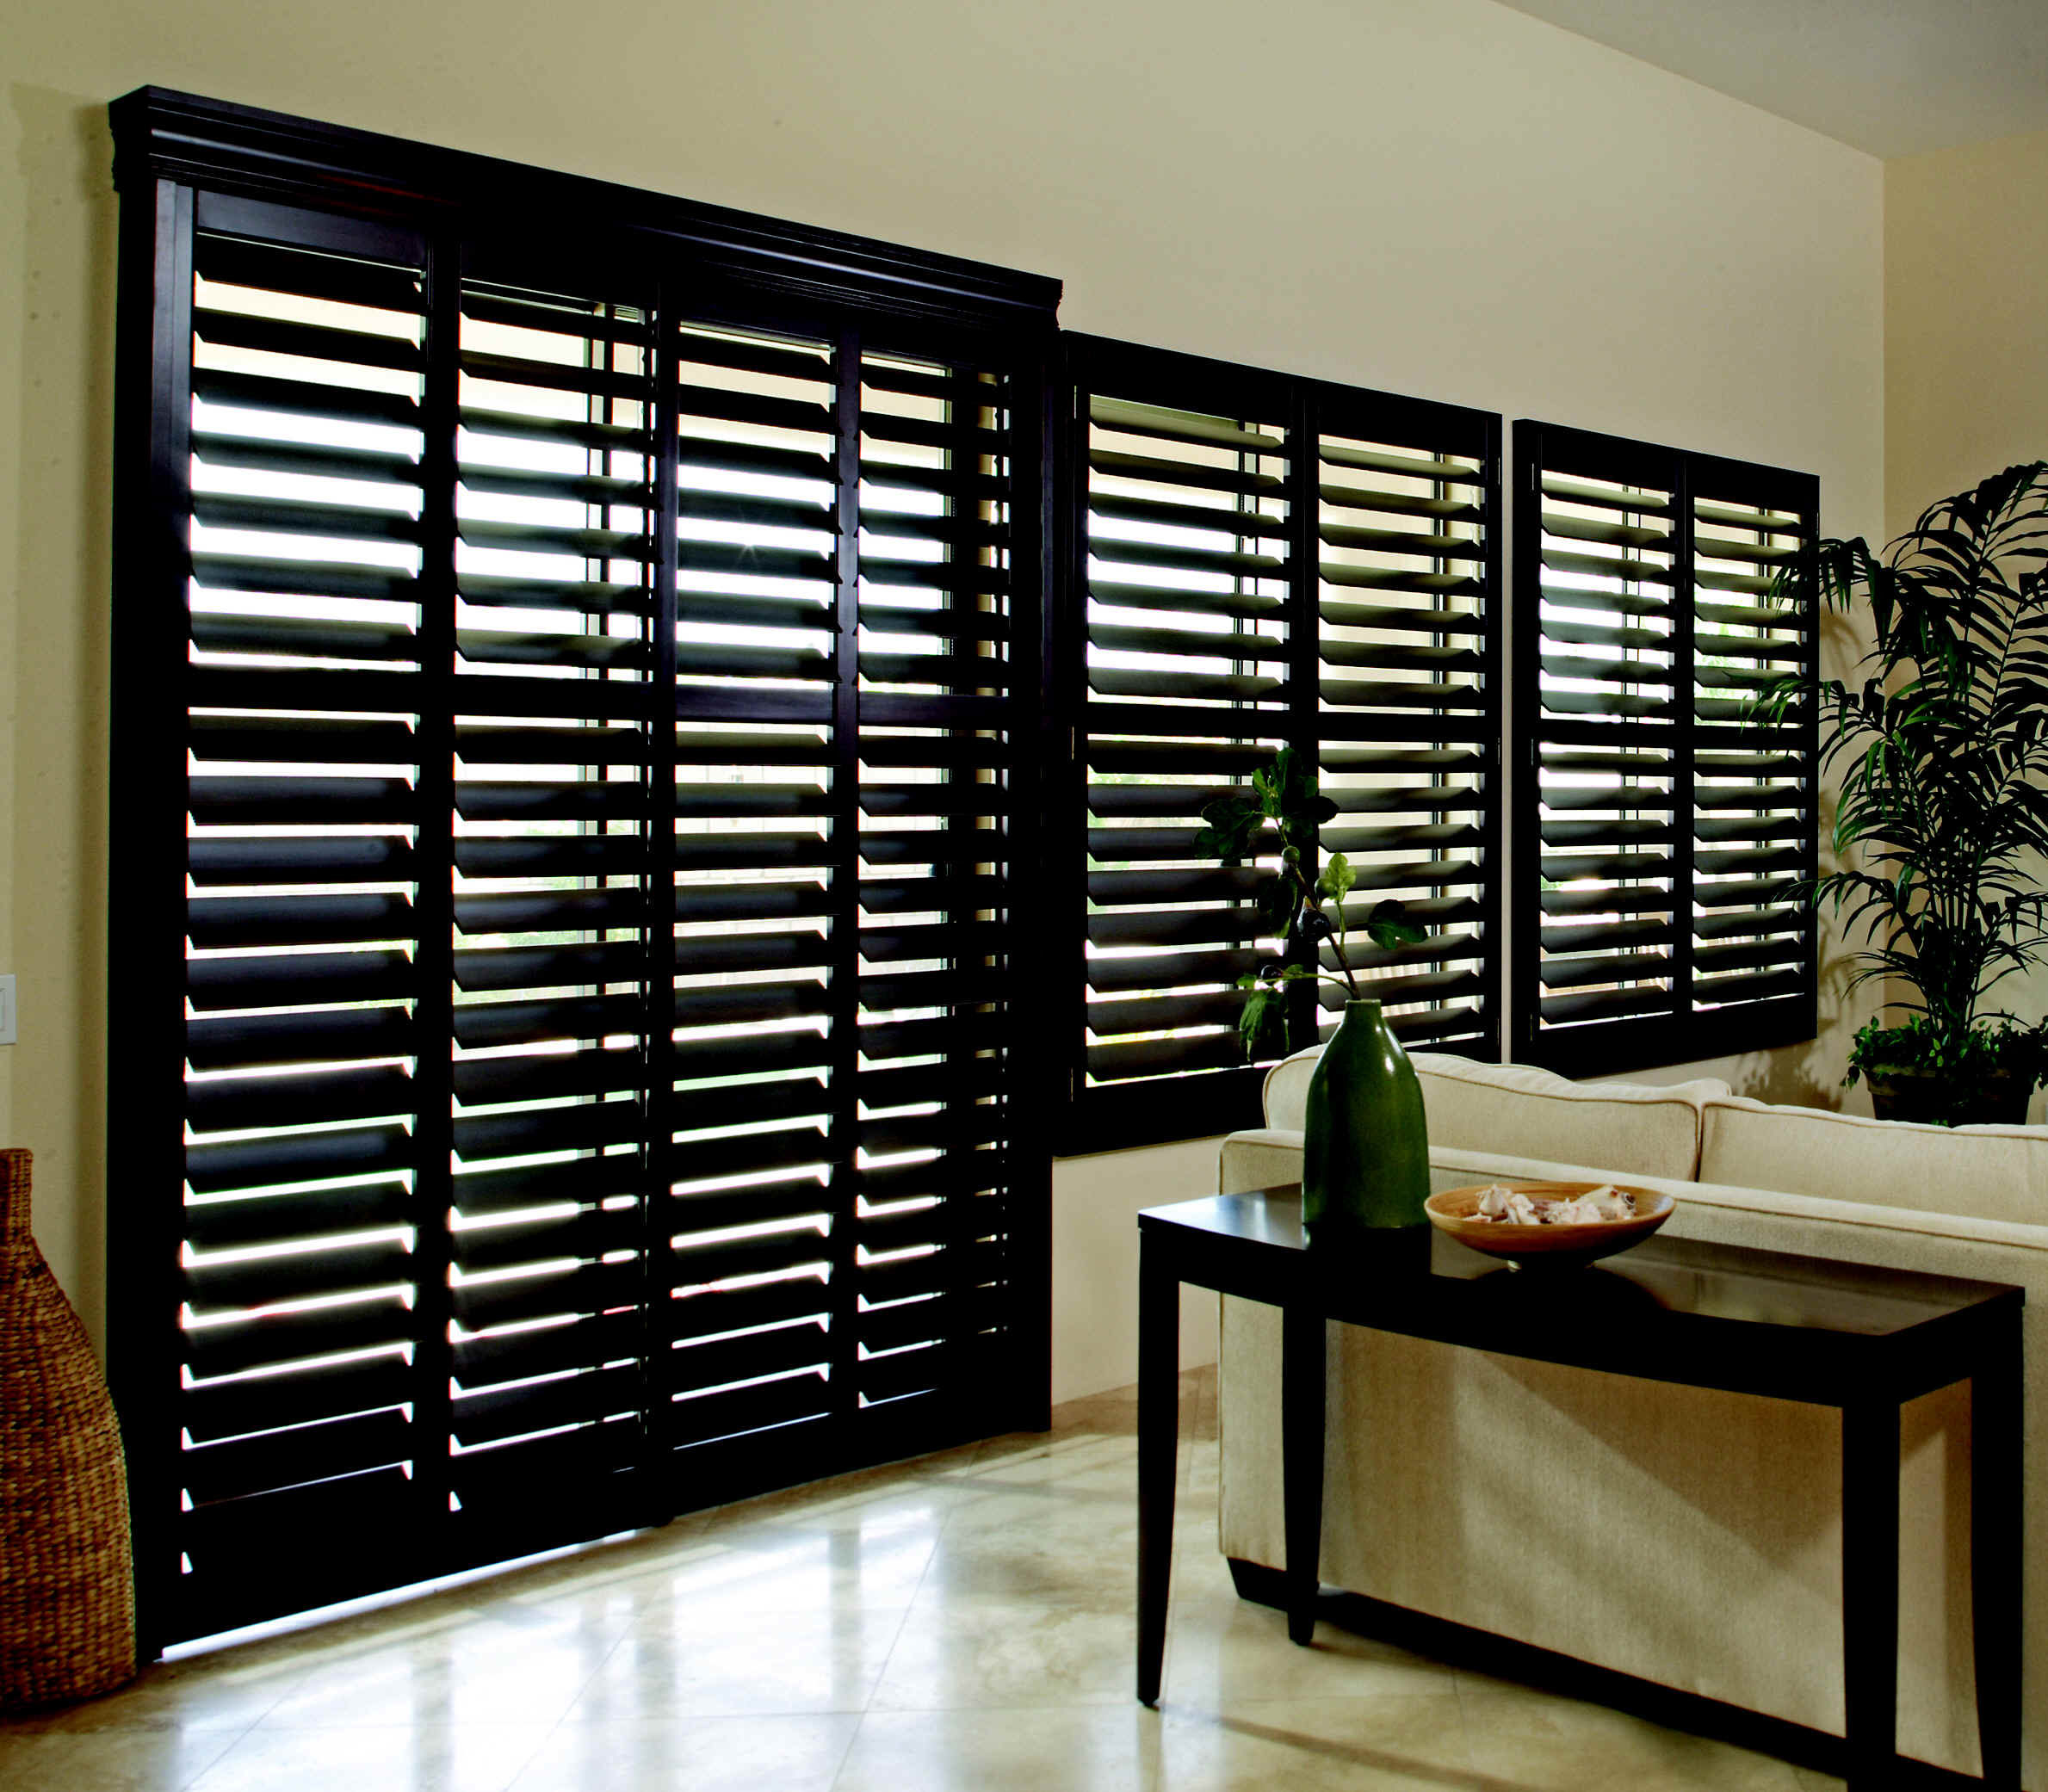 Clearview Shutters For Sale At Low Prices in Bloomfield